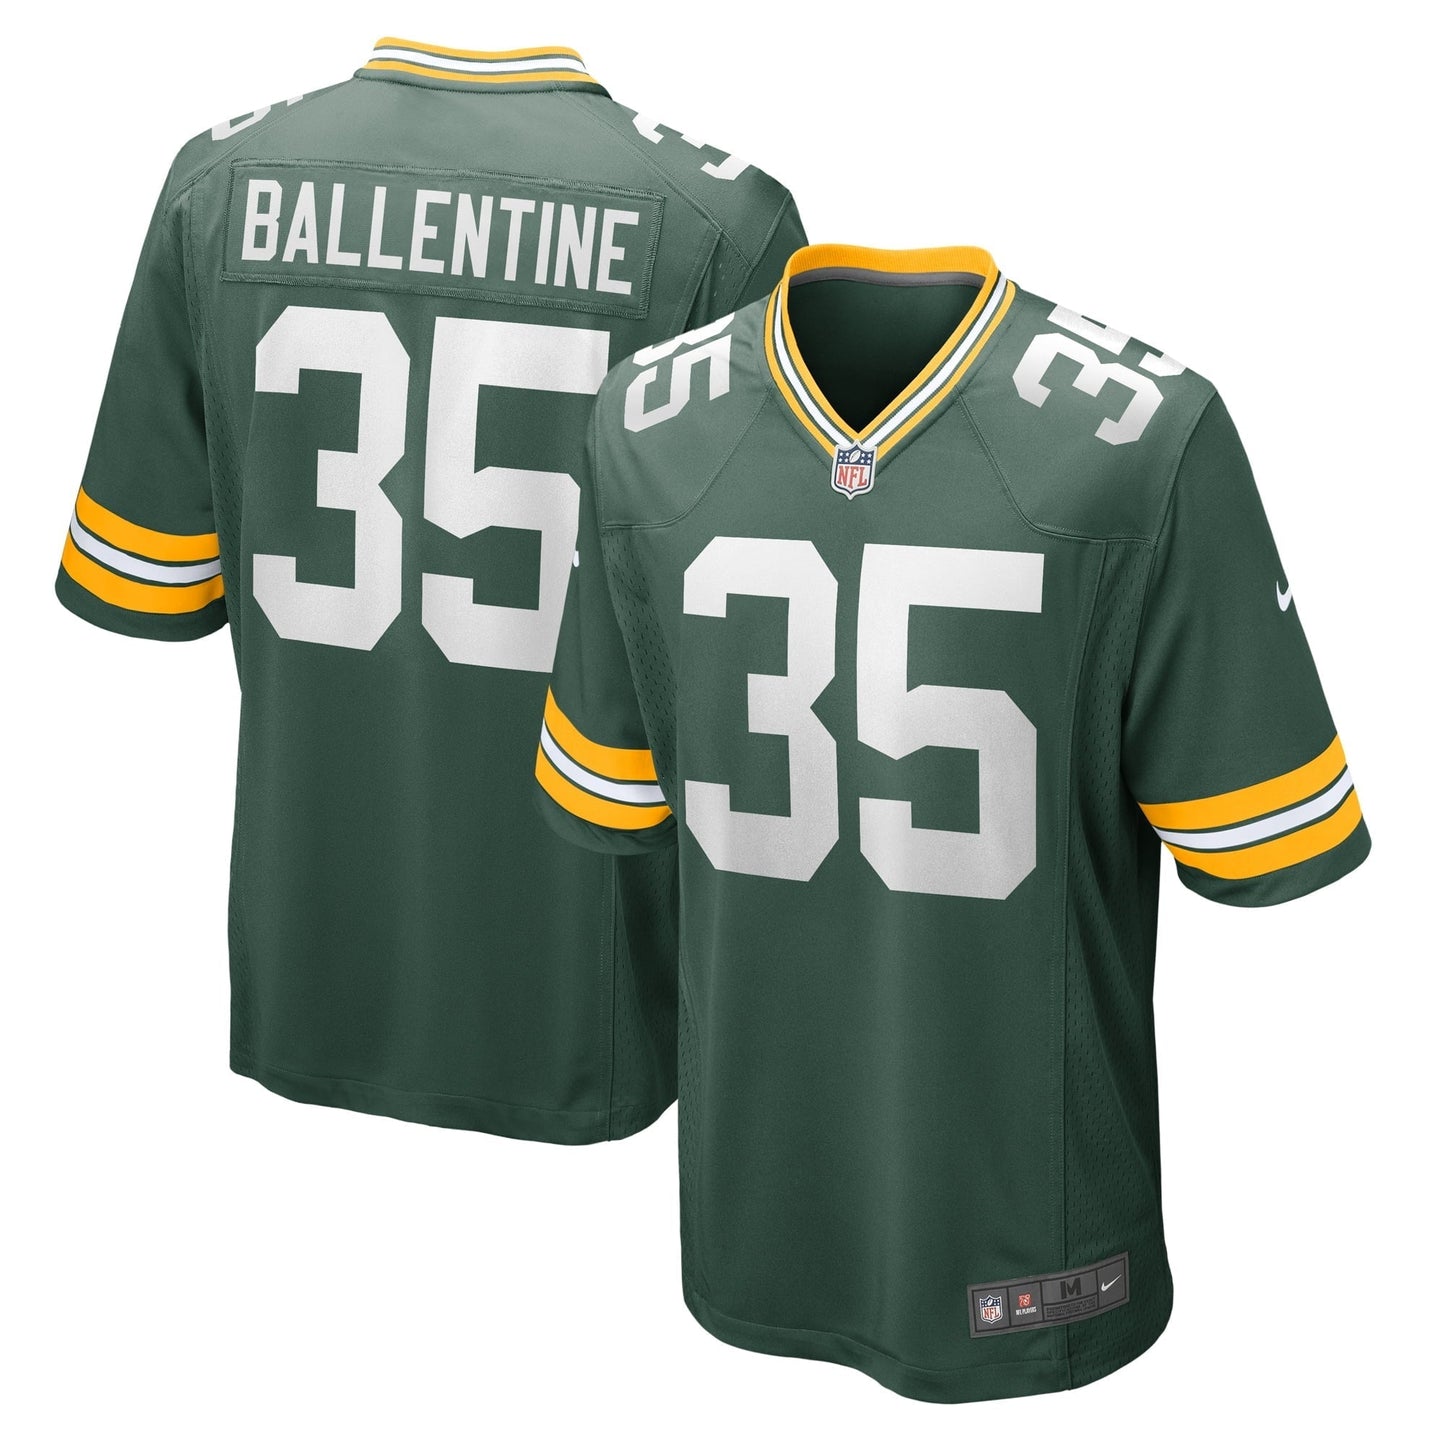 Men's Nike Corey Ballentine Green Green Bay Packers Home Game Player Jersey